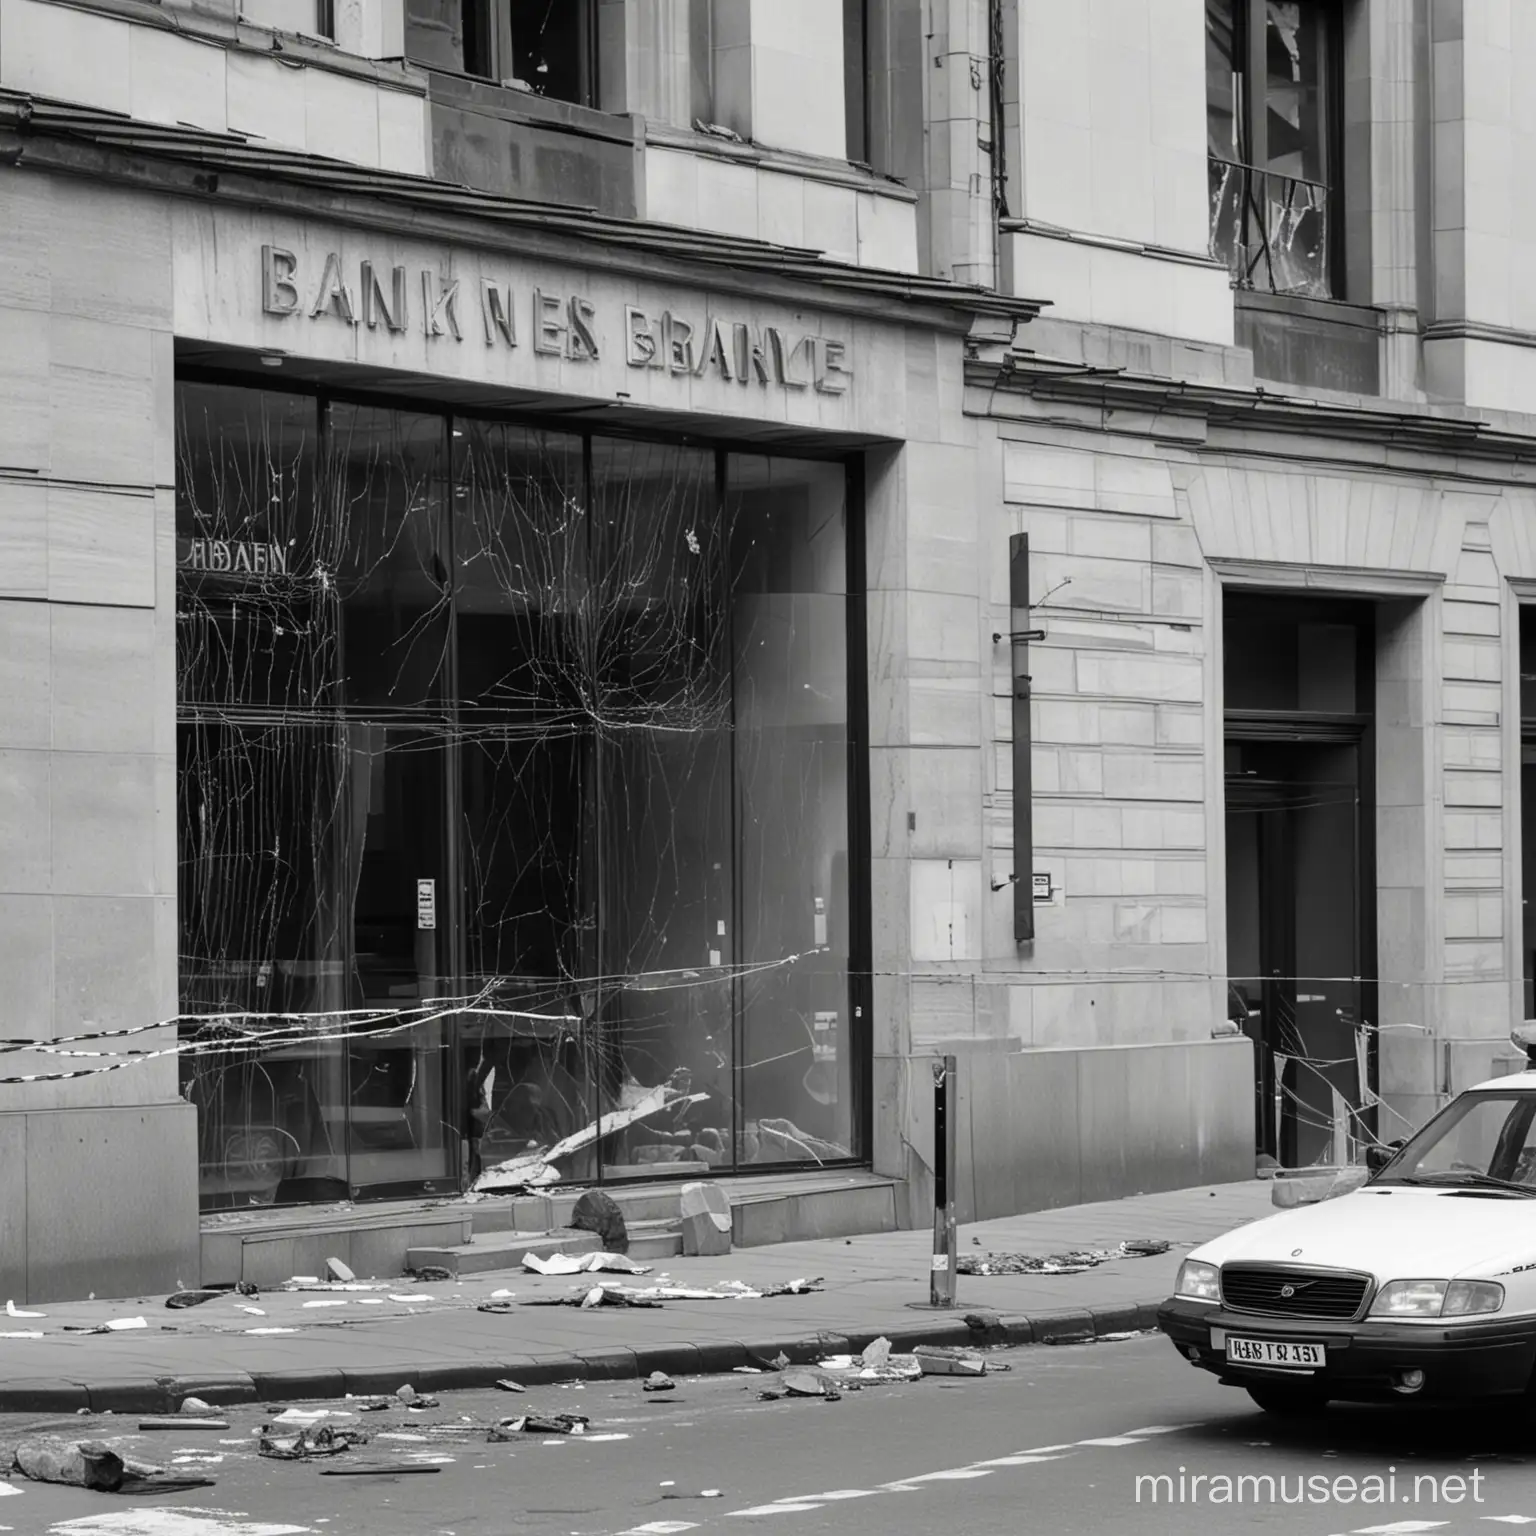 Police Investigation at Bank After Explosion Crime Scene in Black and White